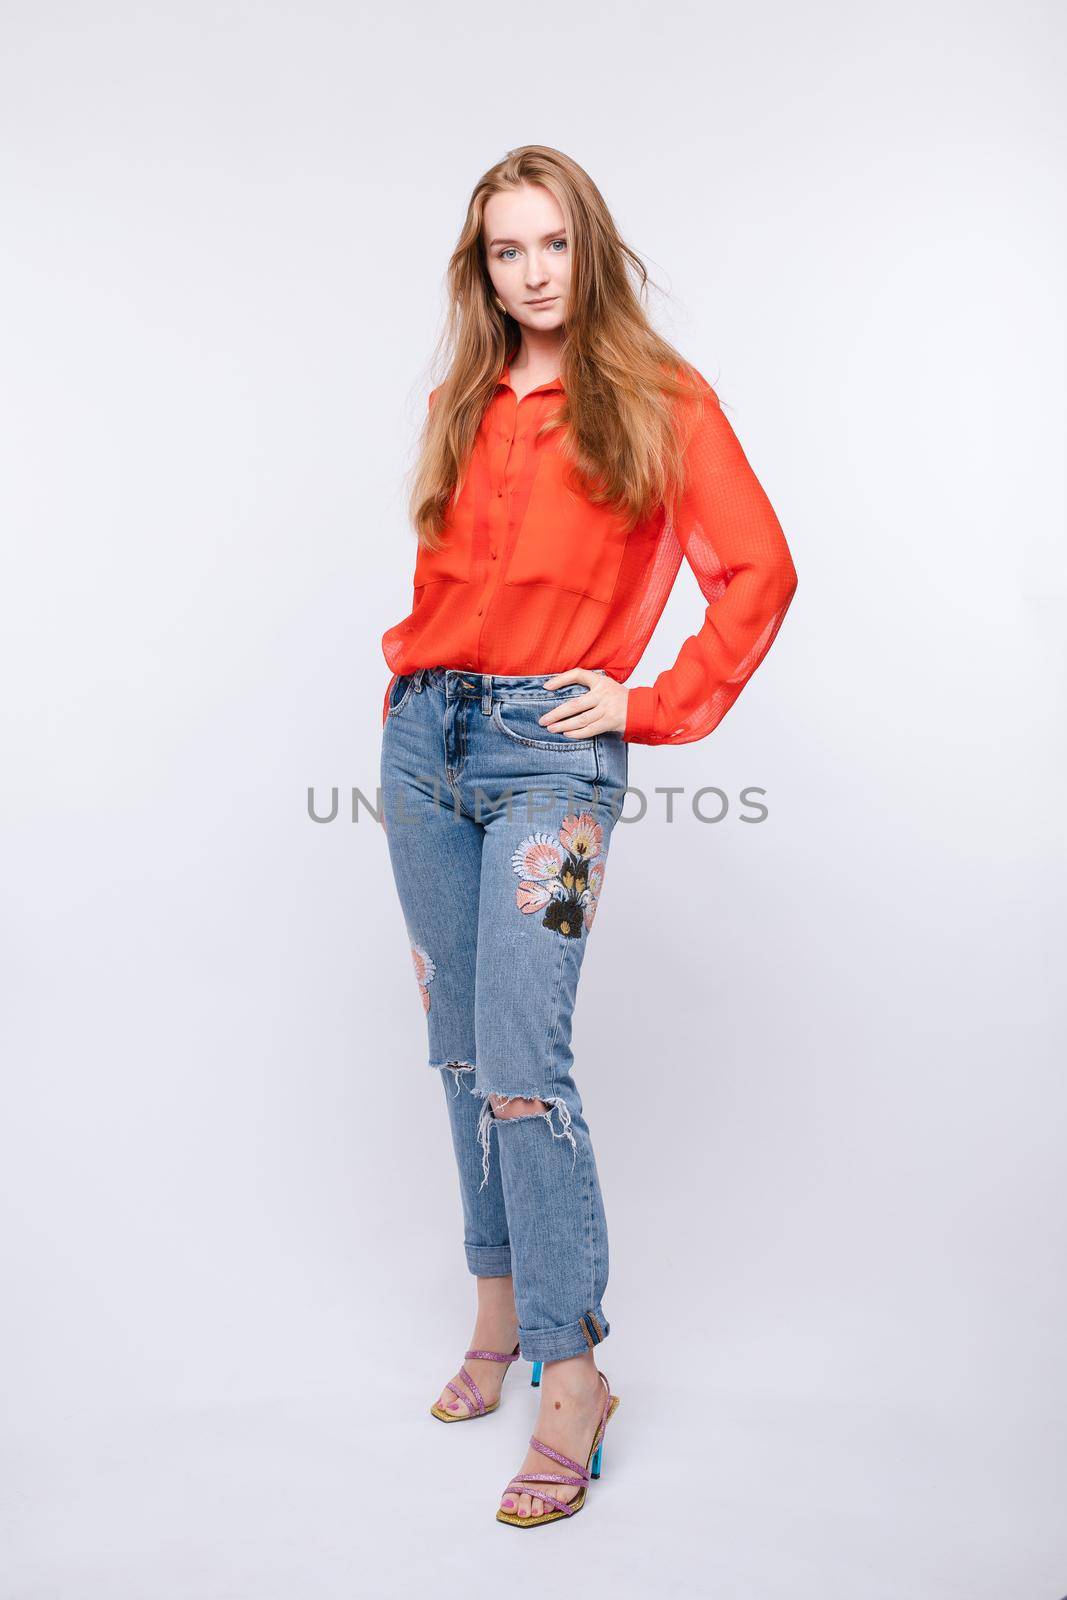 Girl in red blouse and jeans posing on isolated background by StudioLucky